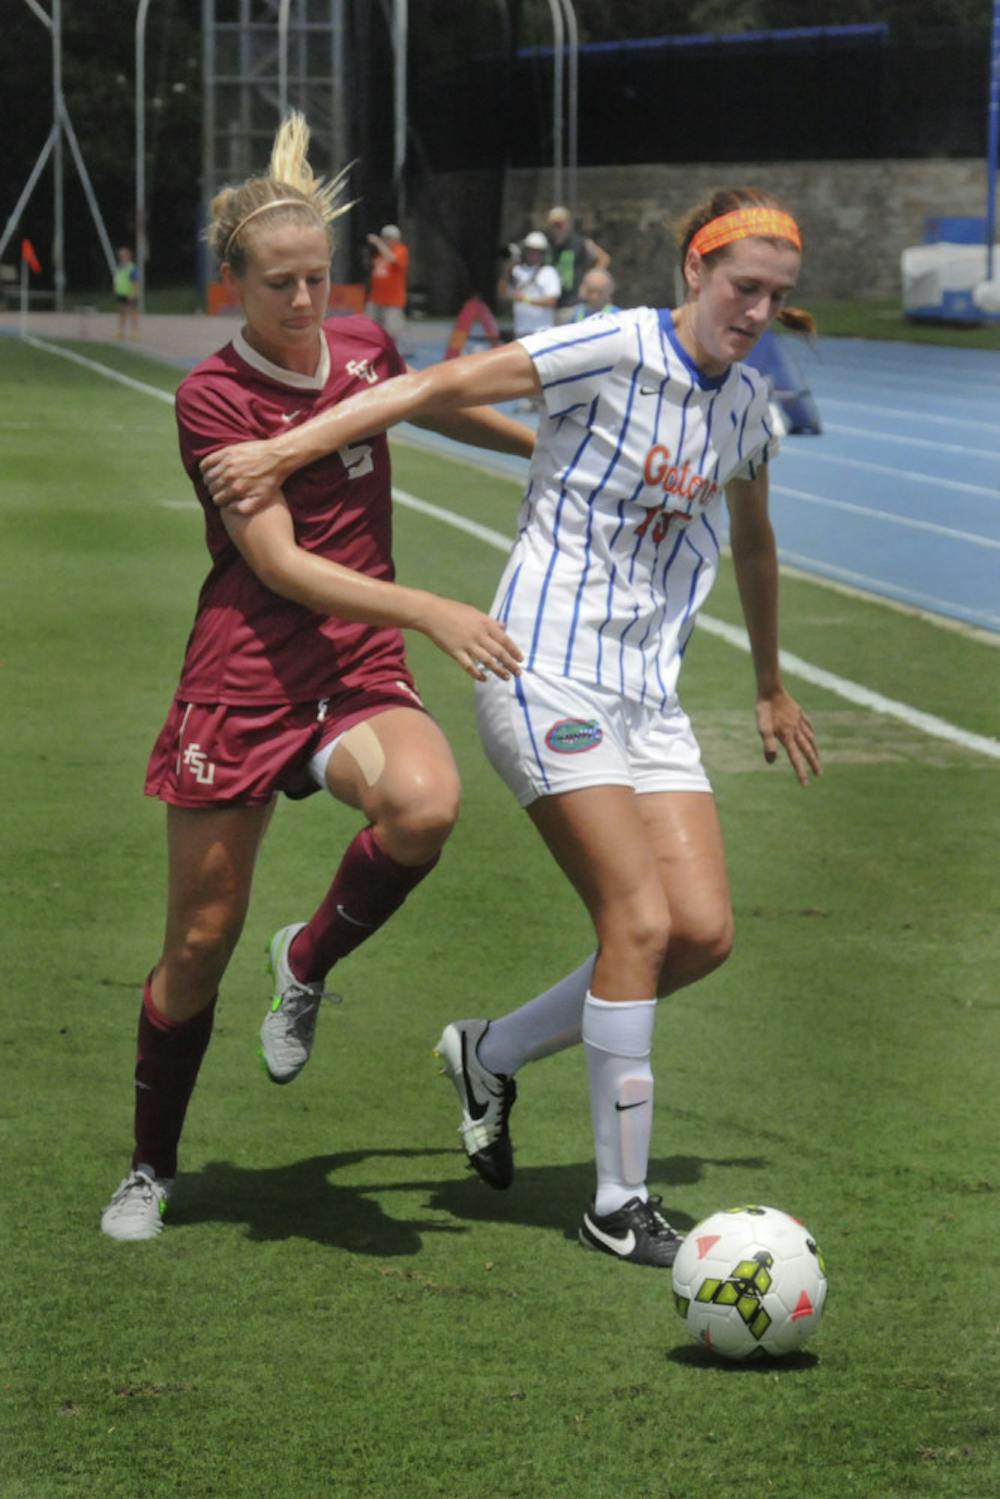 <p>UF's Sarah Troccoli dribbles during Florida's 3-2 win against Florida State on Aug. 30, 2015, at James G. Pressly Stadium.</p>